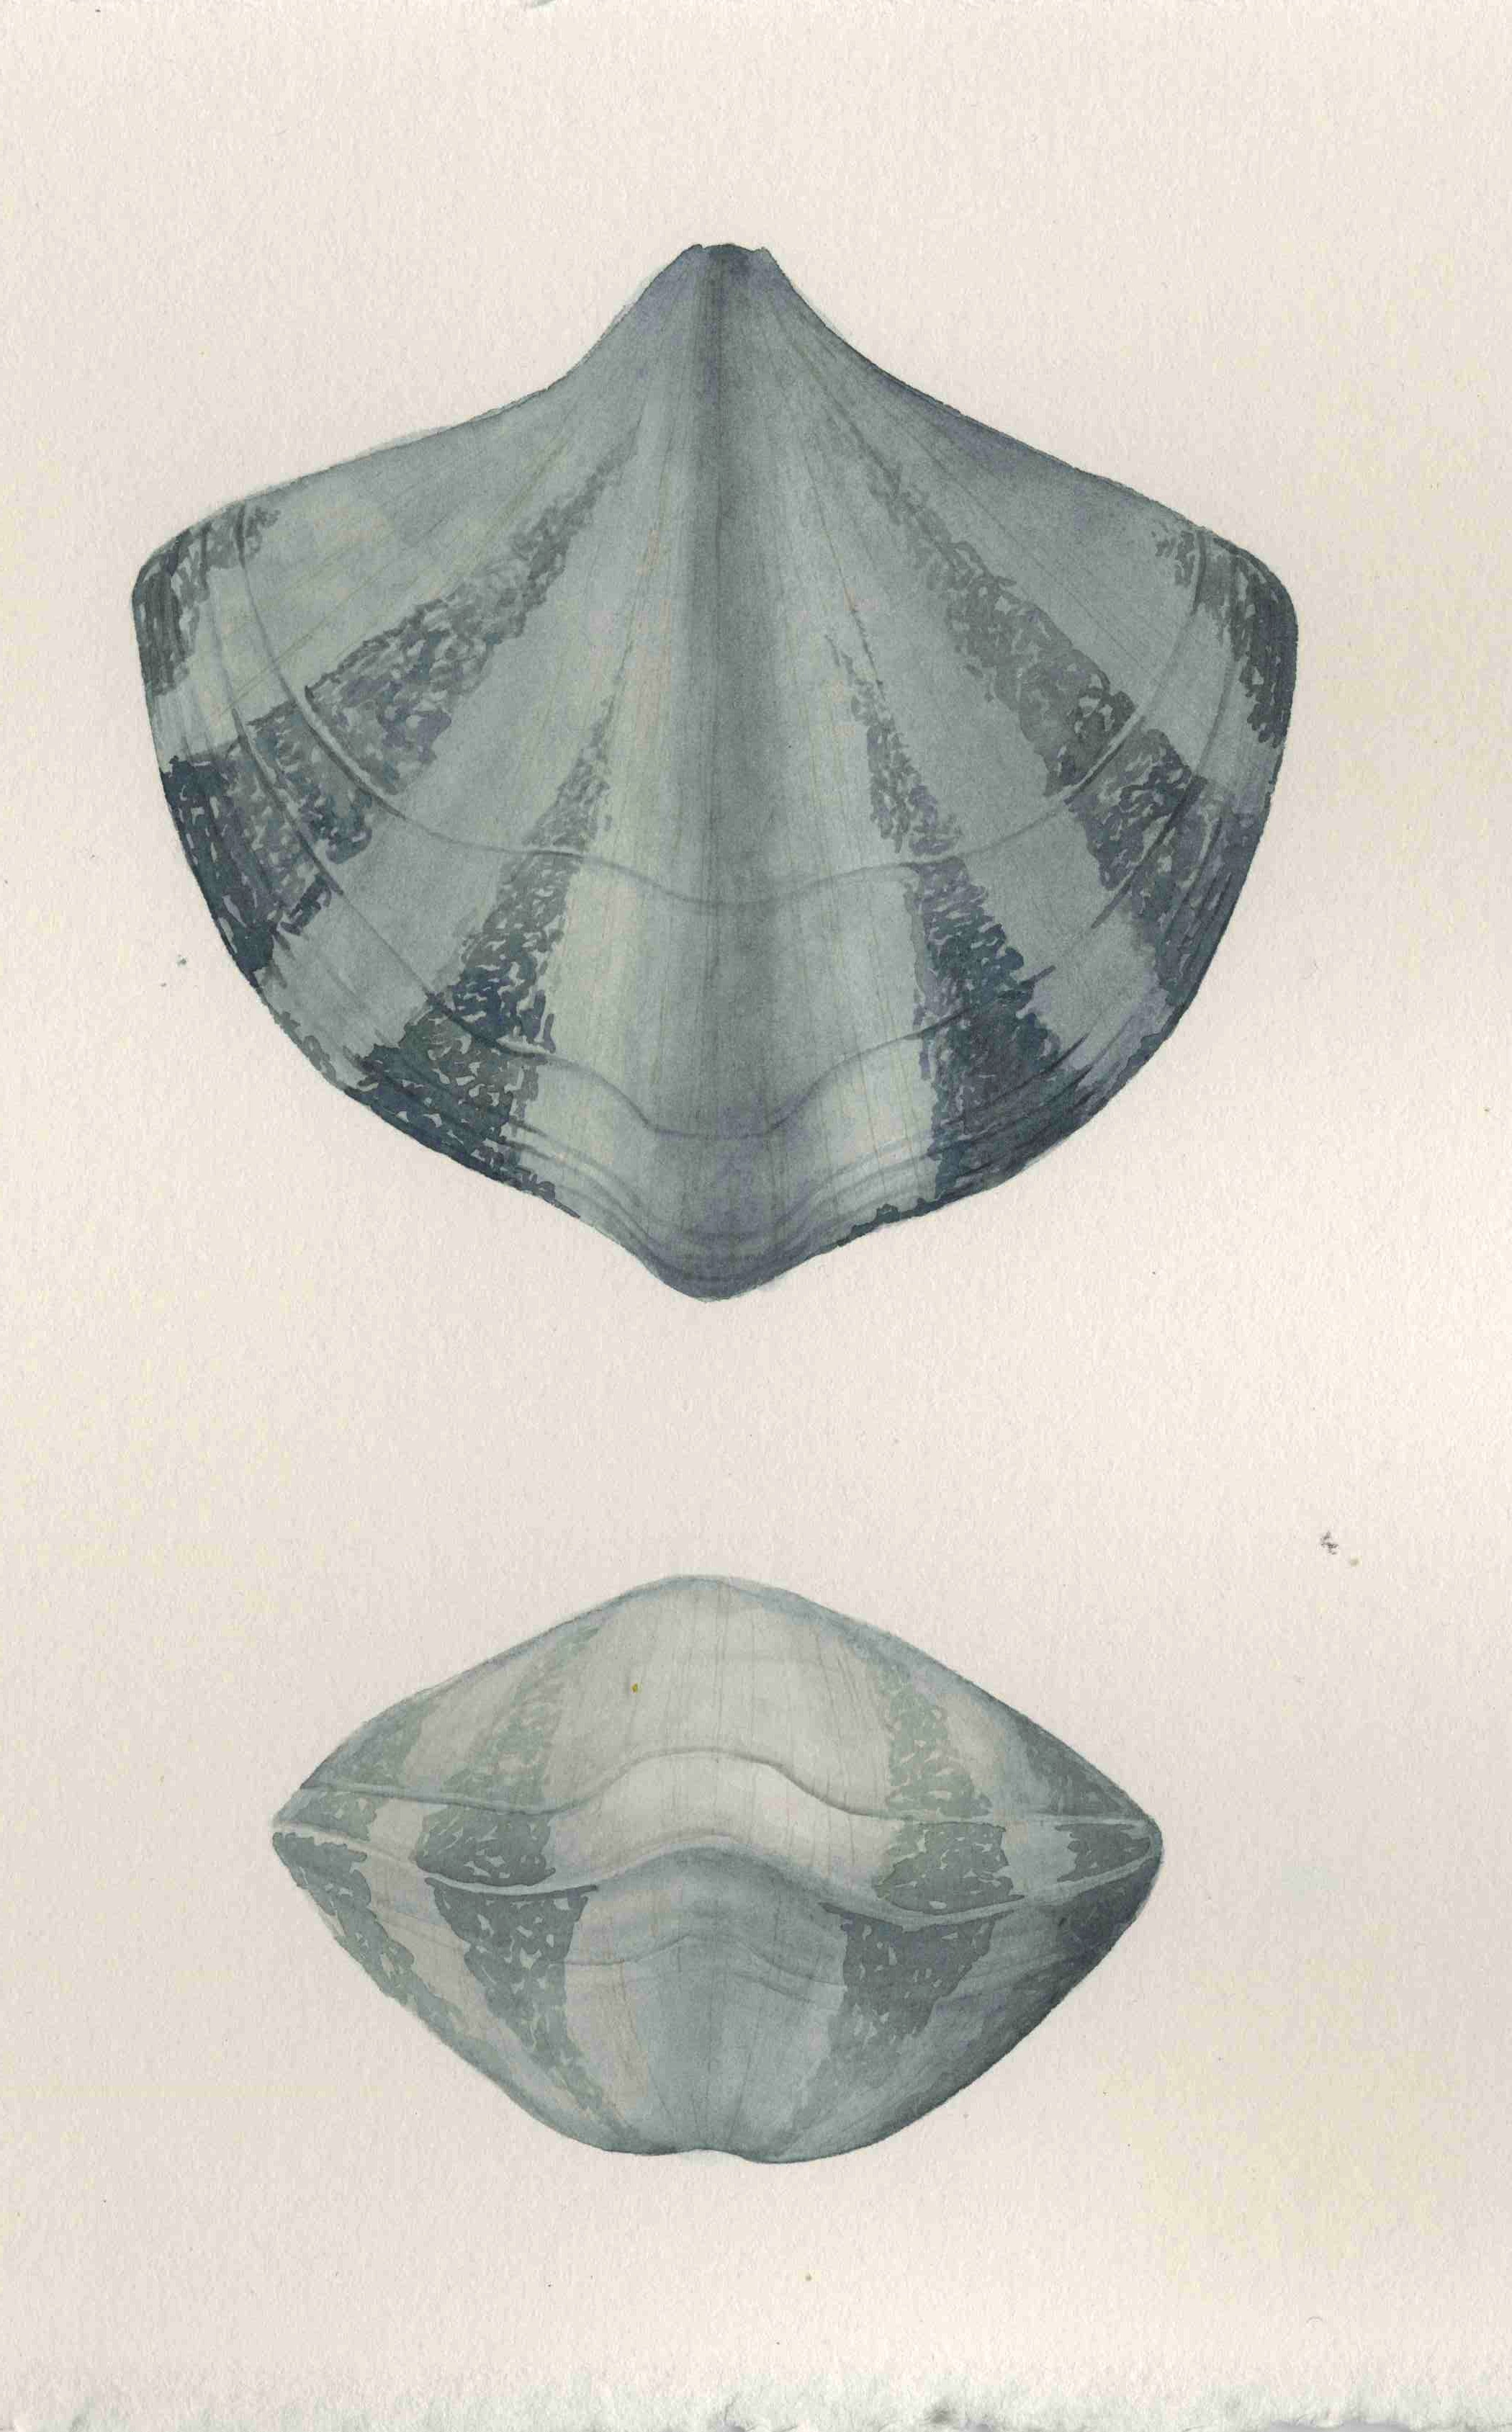 Scientific illustration by Monica Jurik of Eospirifer radiatus brachiopod  based on specimens  from Chicago and Indiana Waldron Shale. Common Silurian reef brachiopod from the Chicago - Milwaukee area. The illustration is a water color based on specimens in our collections.